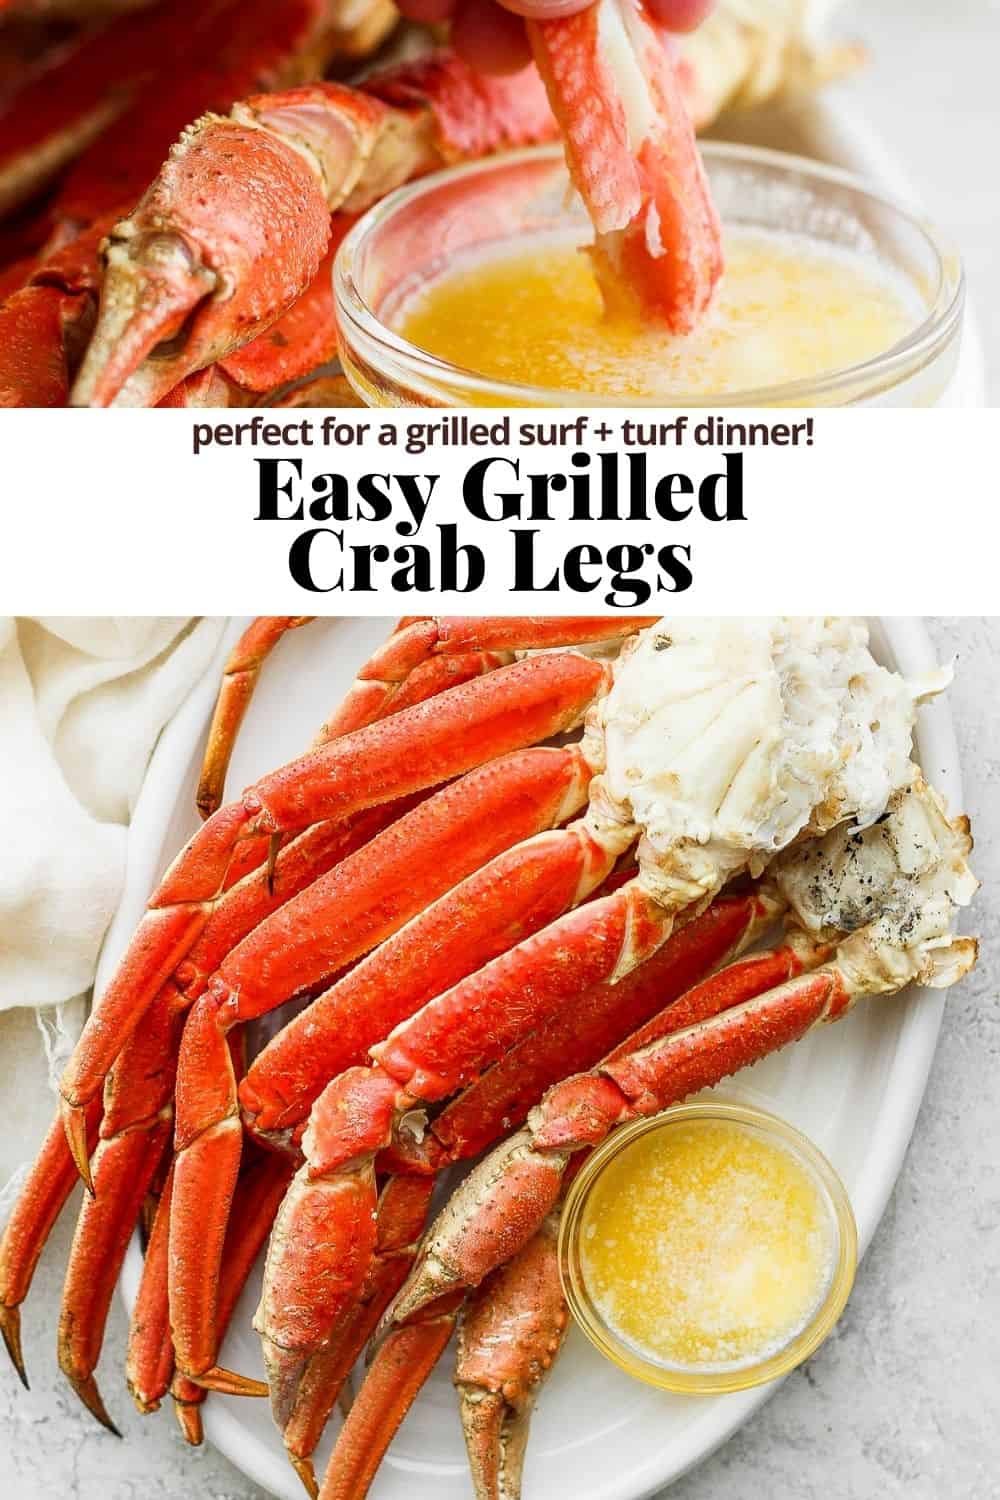 Pinterest image for grilled crab legs.